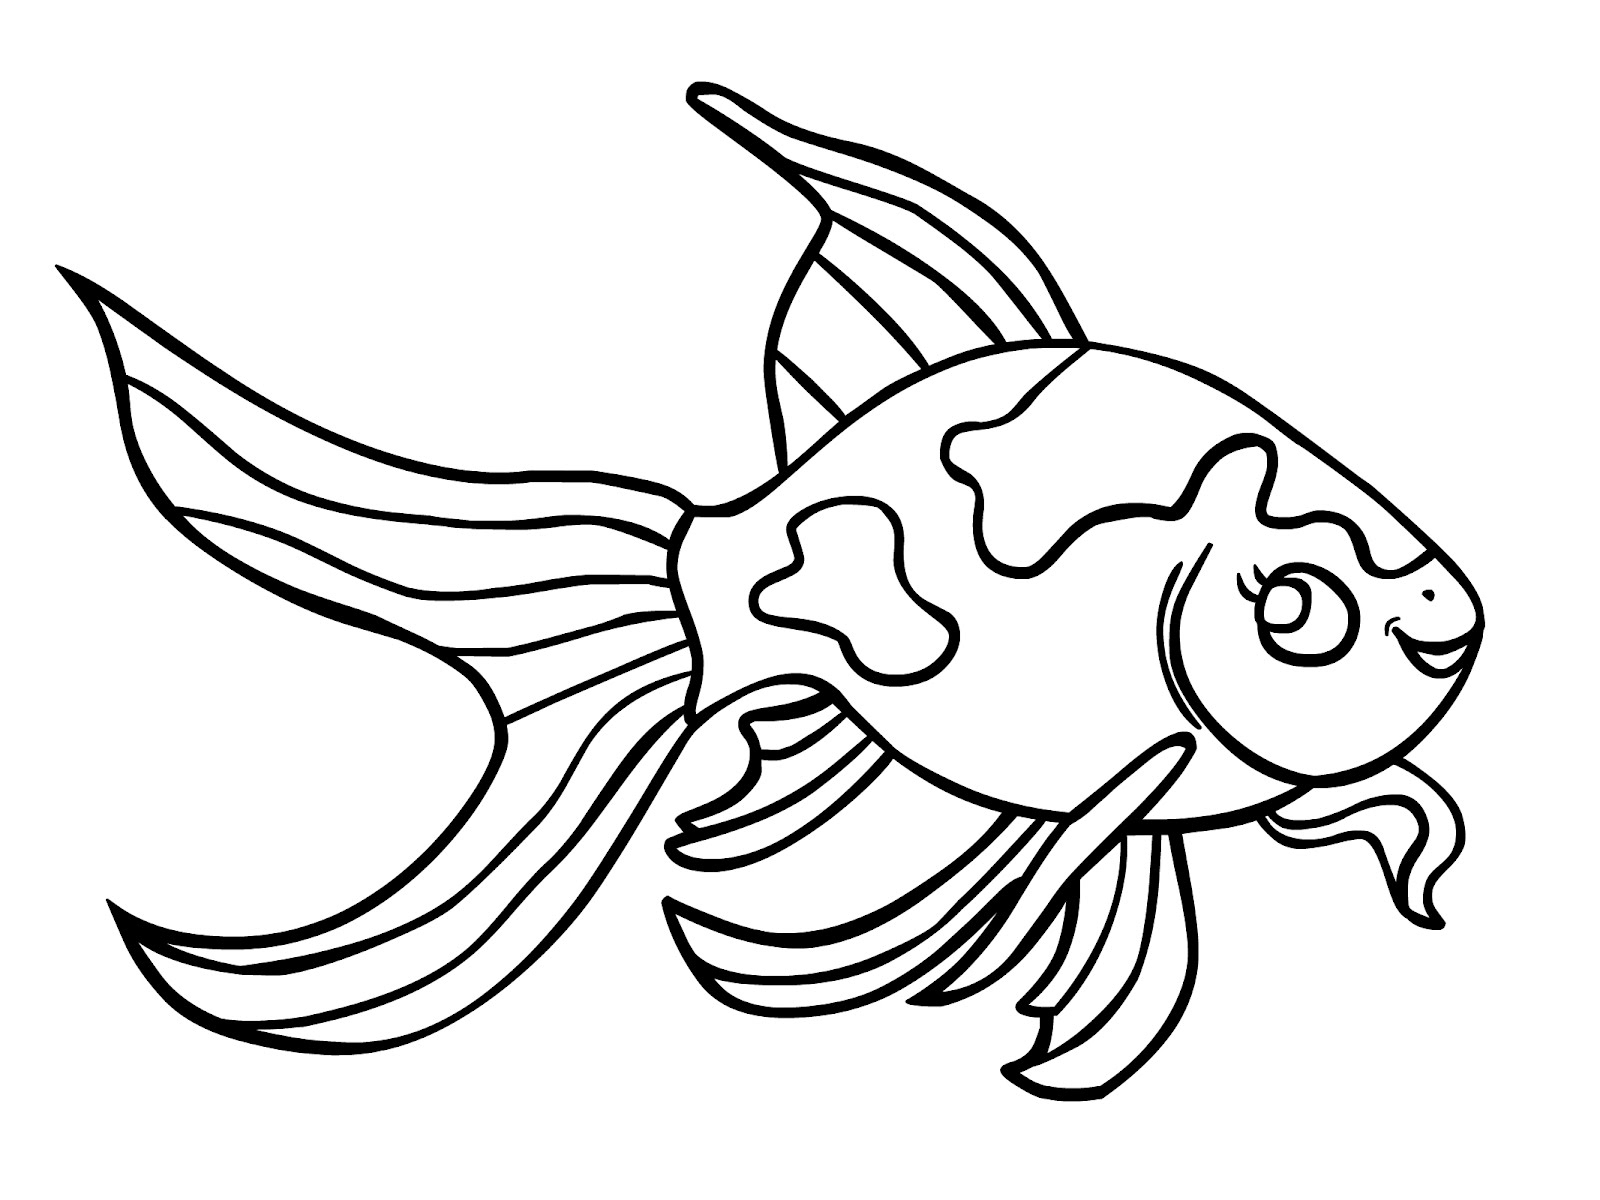 Fish Coloring Pages Free Printable | Coloring Pages - Free Printable Fish Coloring Pages